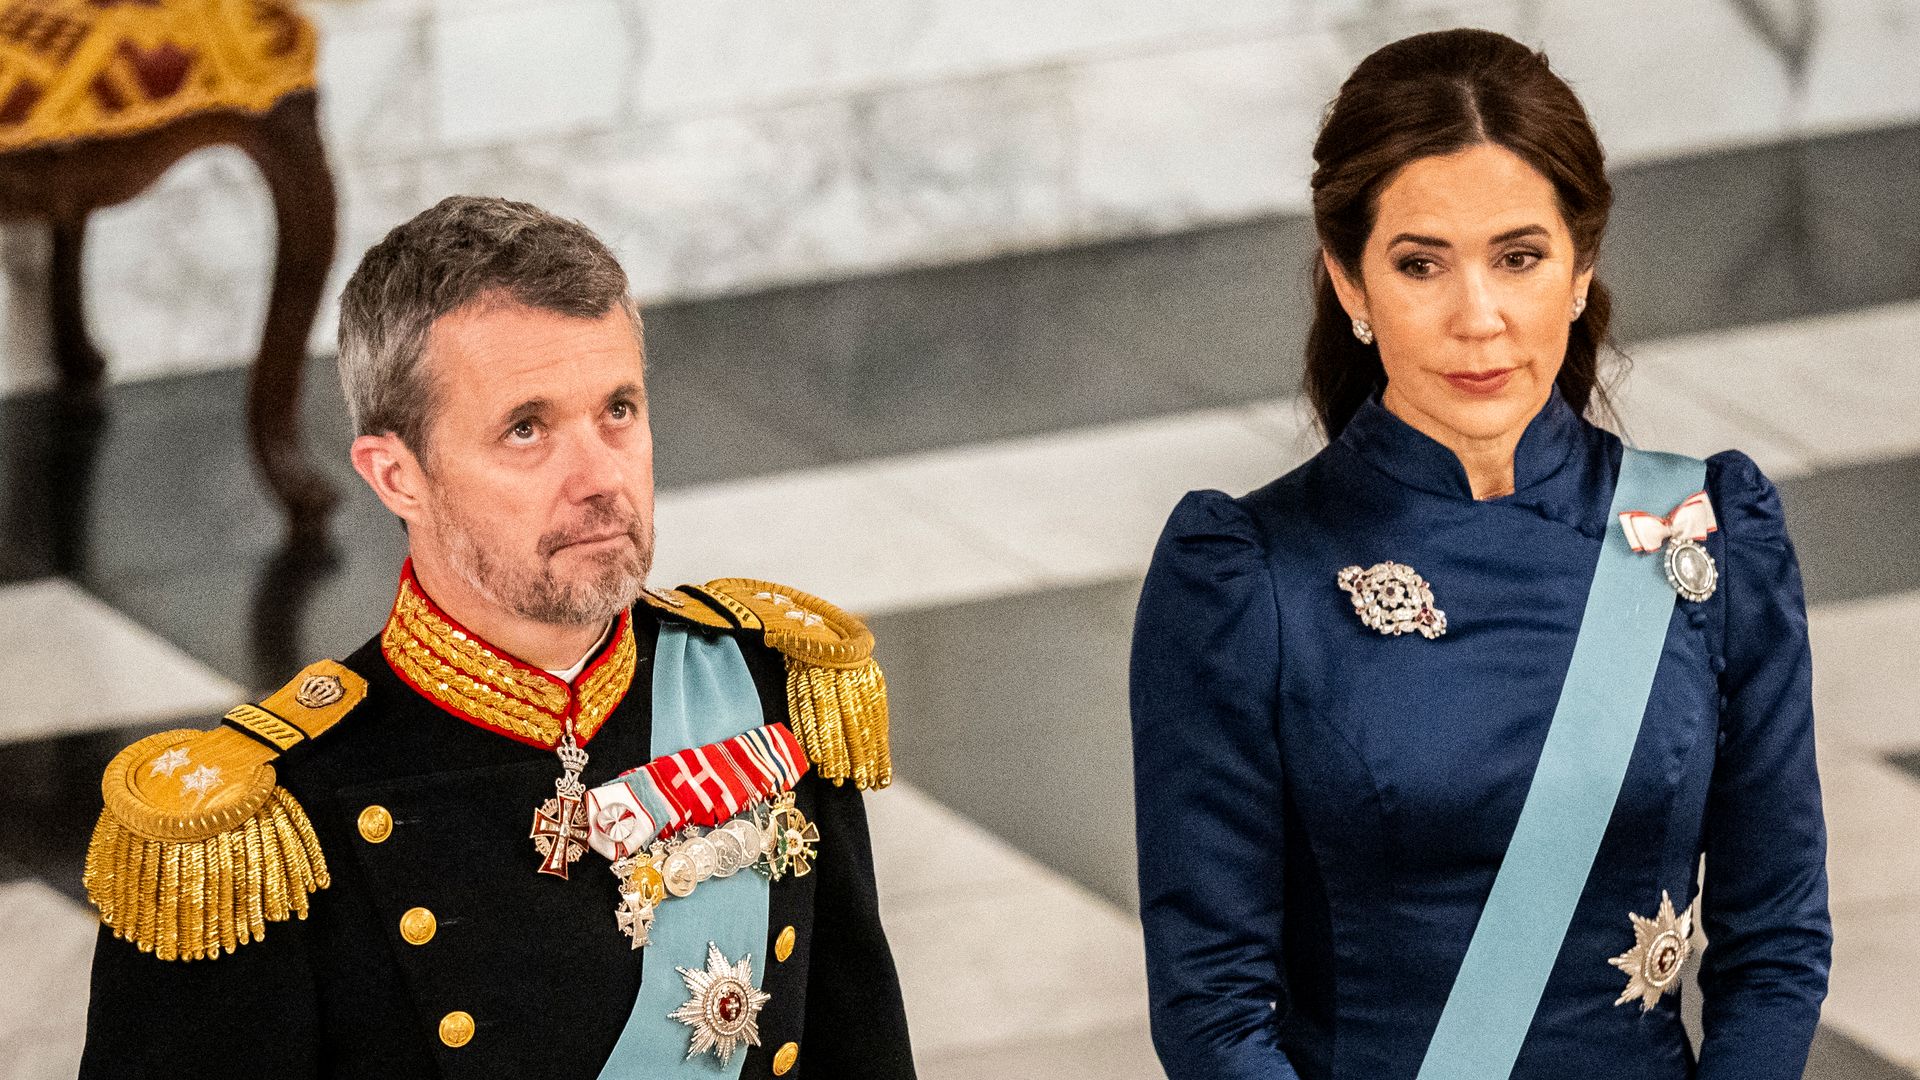 King Frederik reacts to 'devastating fire' - releases statement alongside Queen Mary